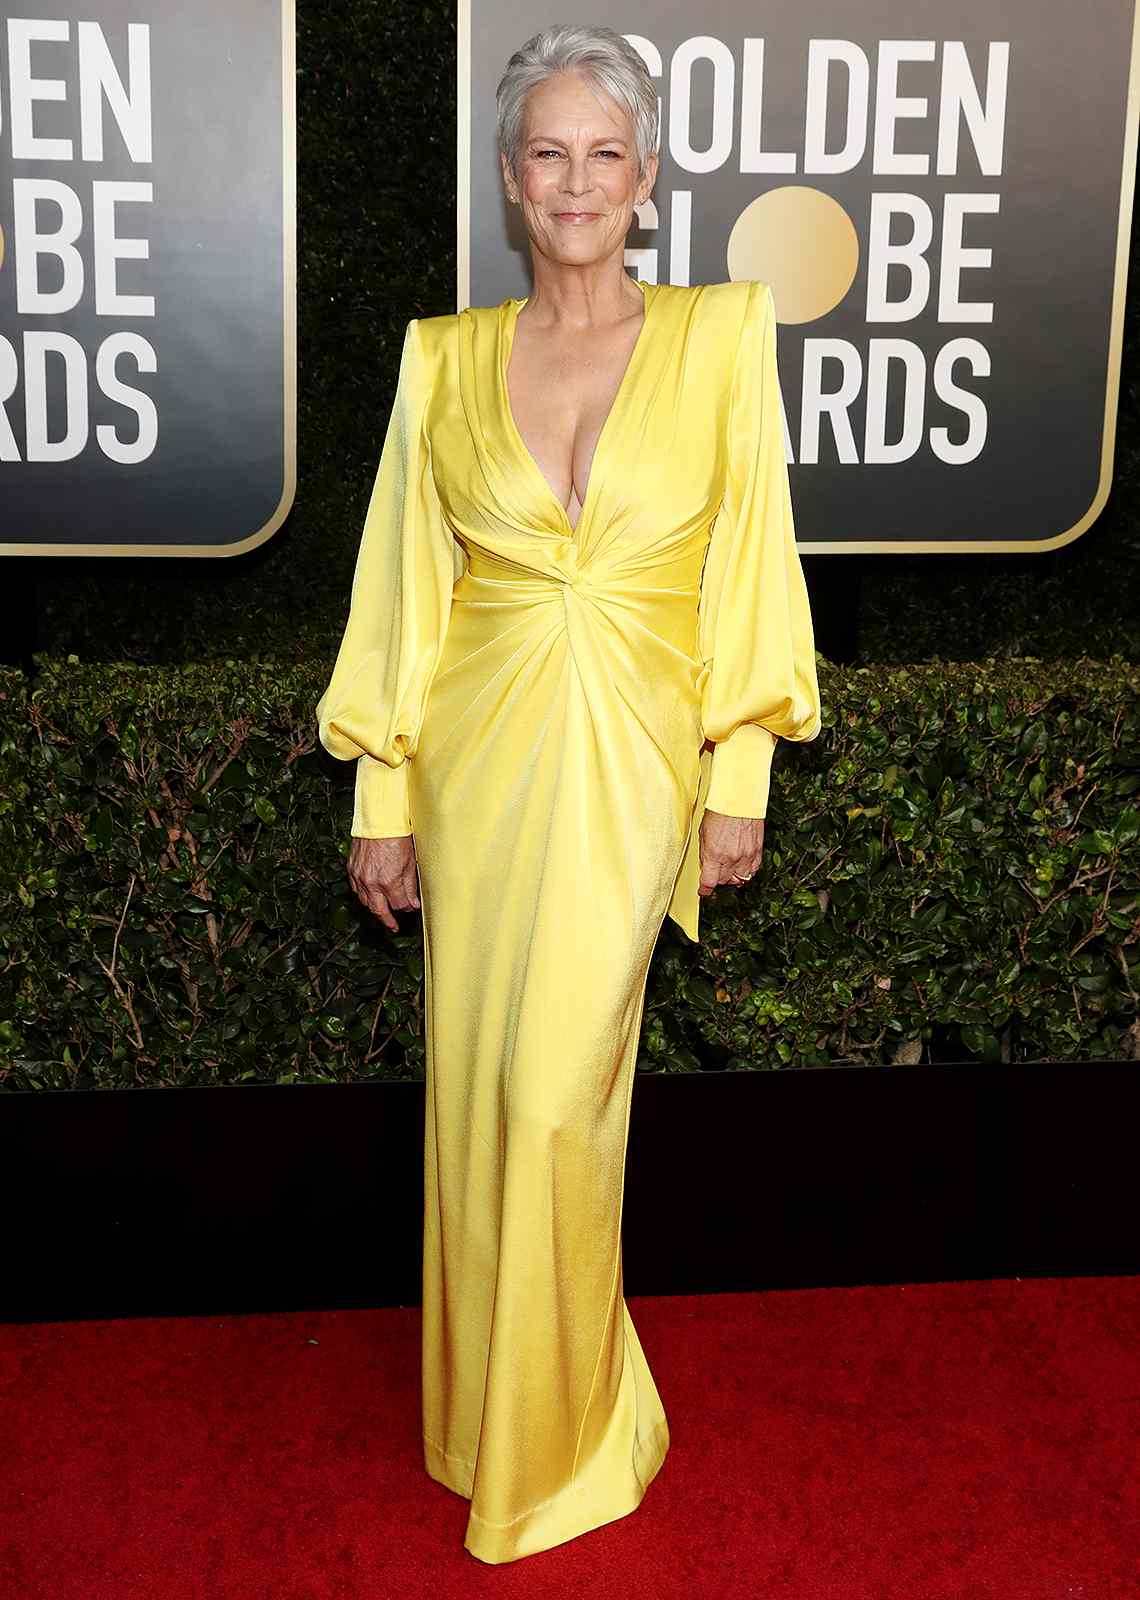 Jamie Lee Curtis Jokes About Her Golden Globes Cleavage ...